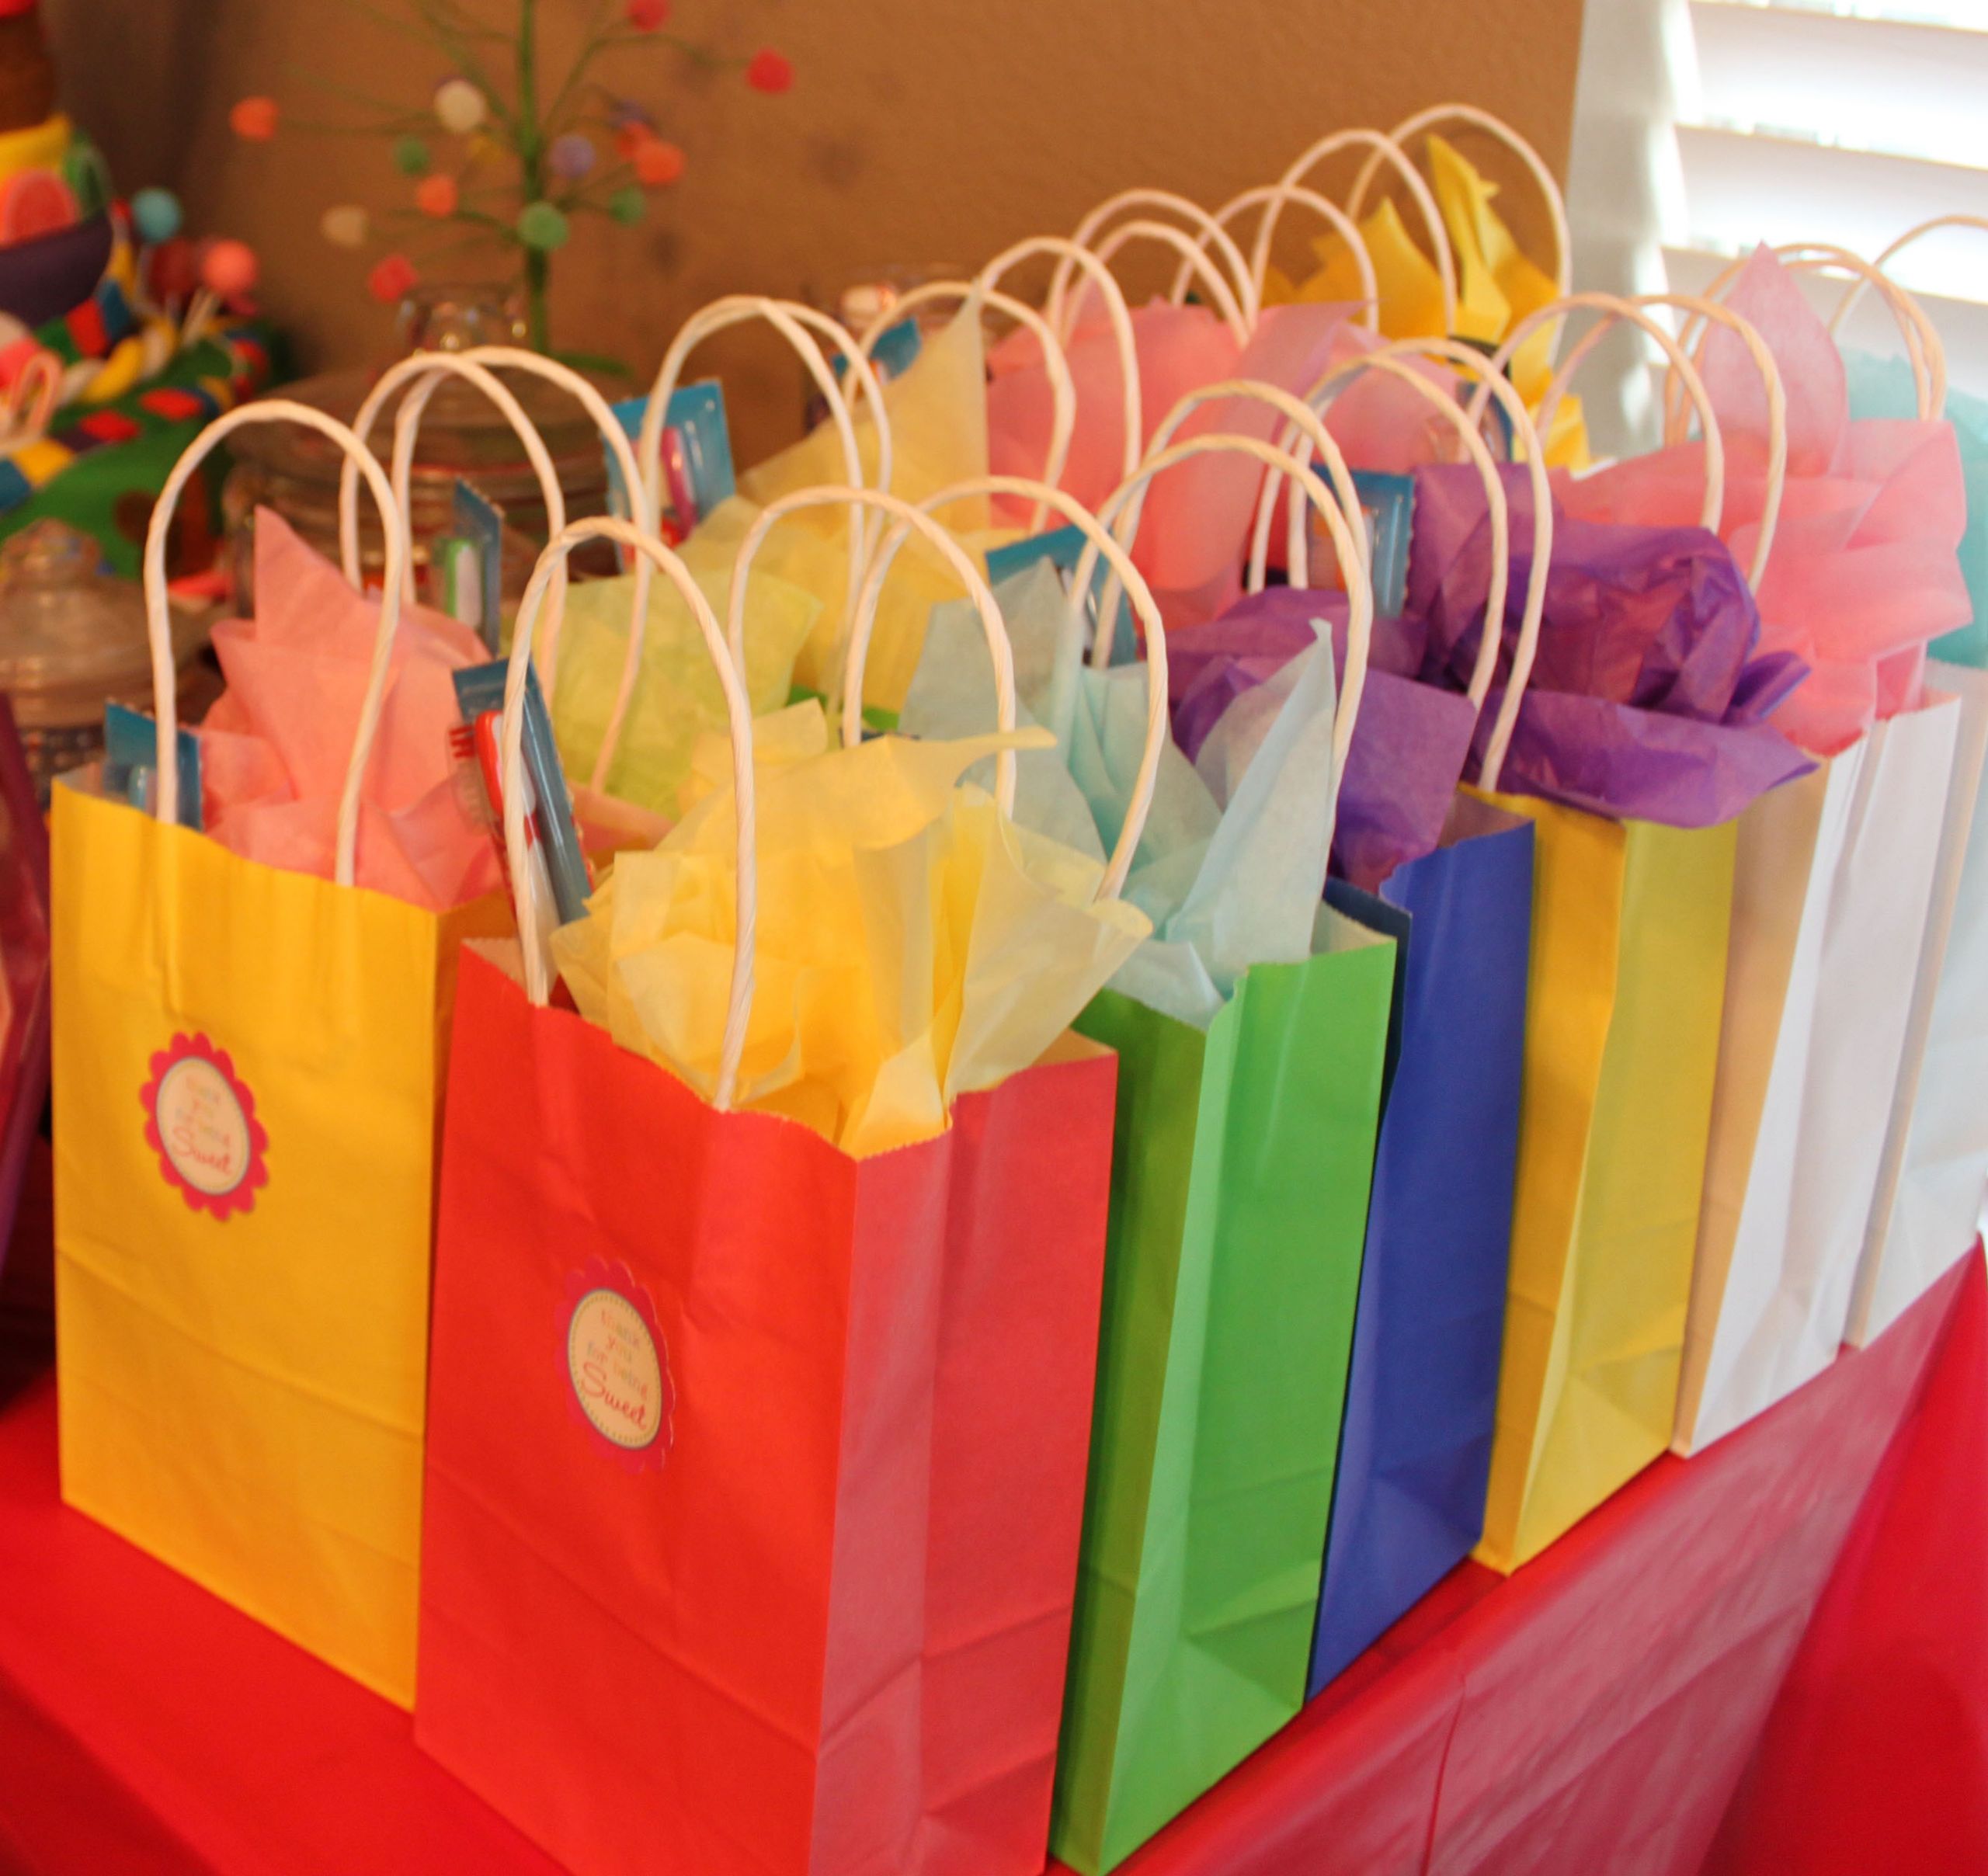 Birthday Party Treat Bag Ideas
 Candy Land Party